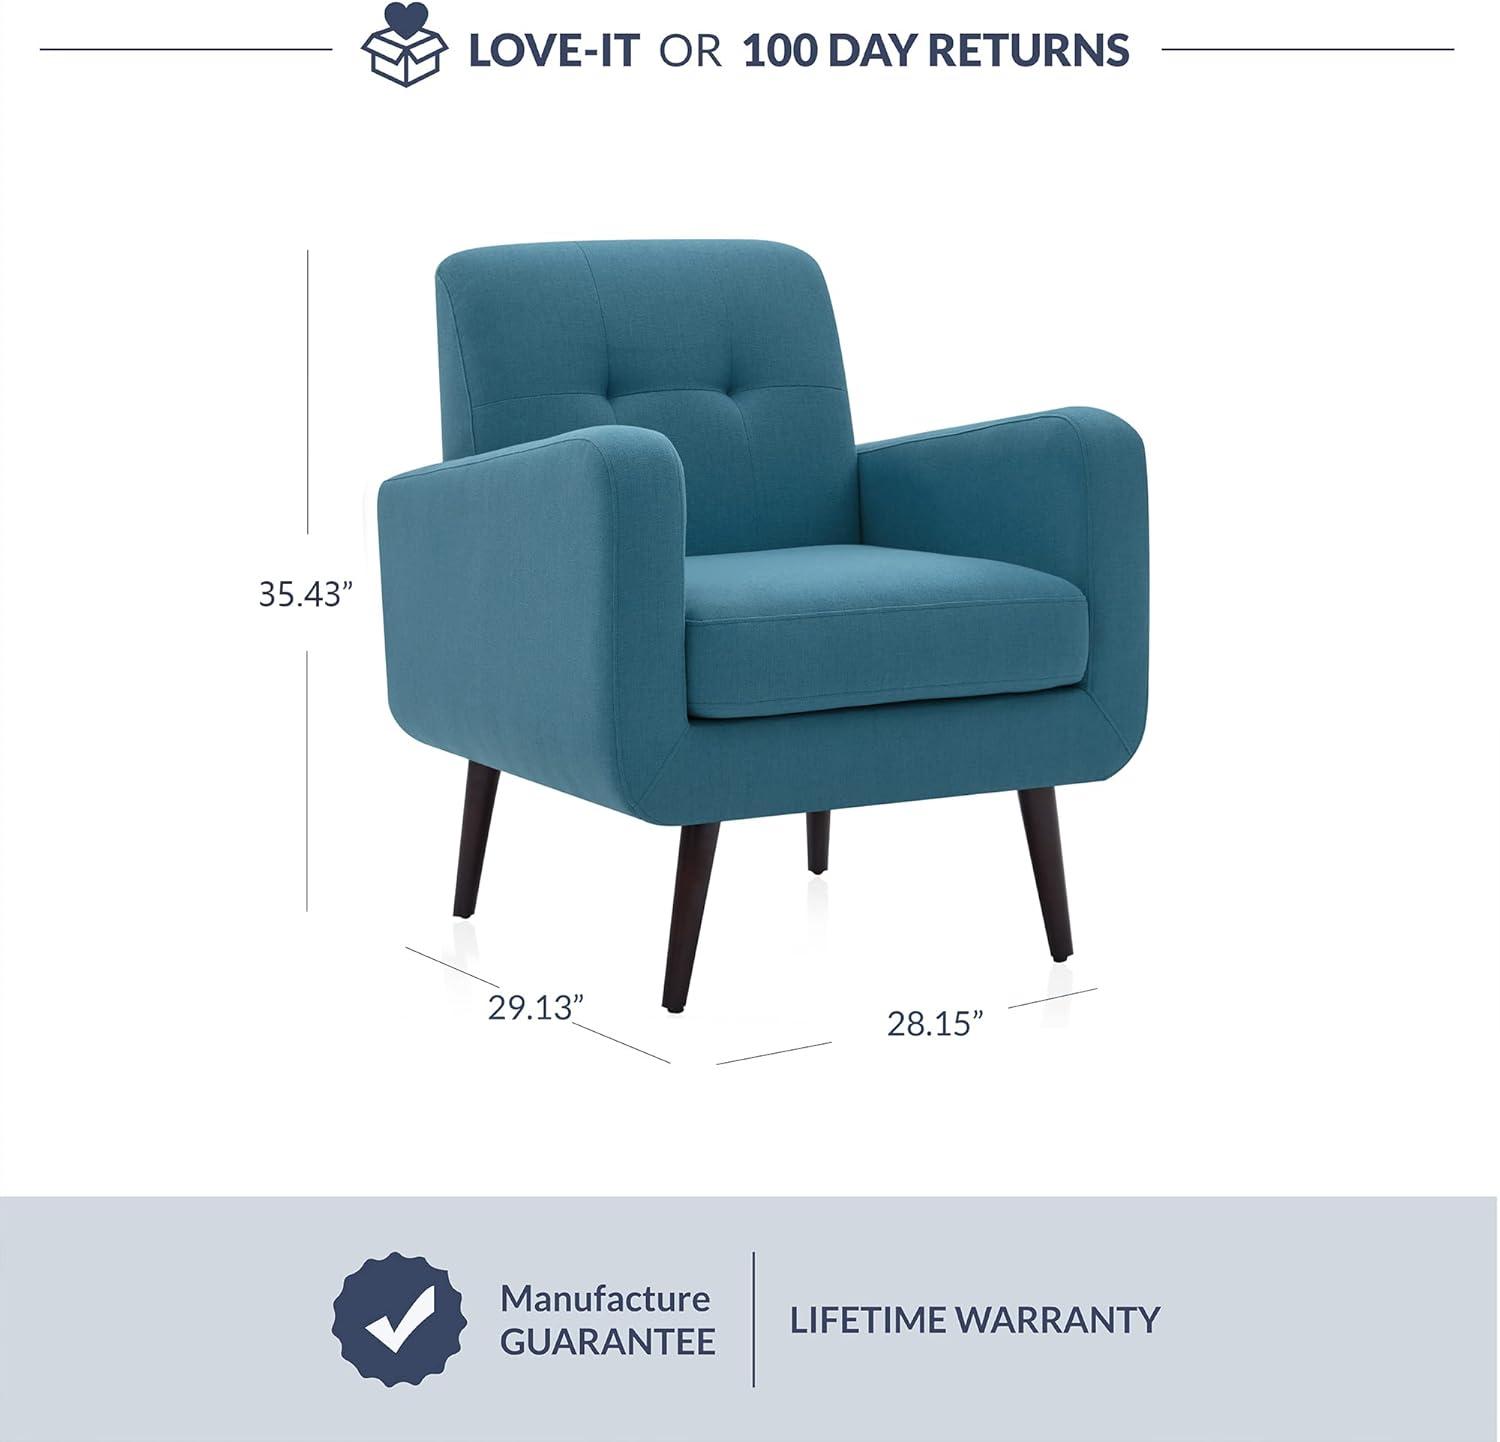 Mid-Century Modern Linen Upholstered Accent Chair in Blue